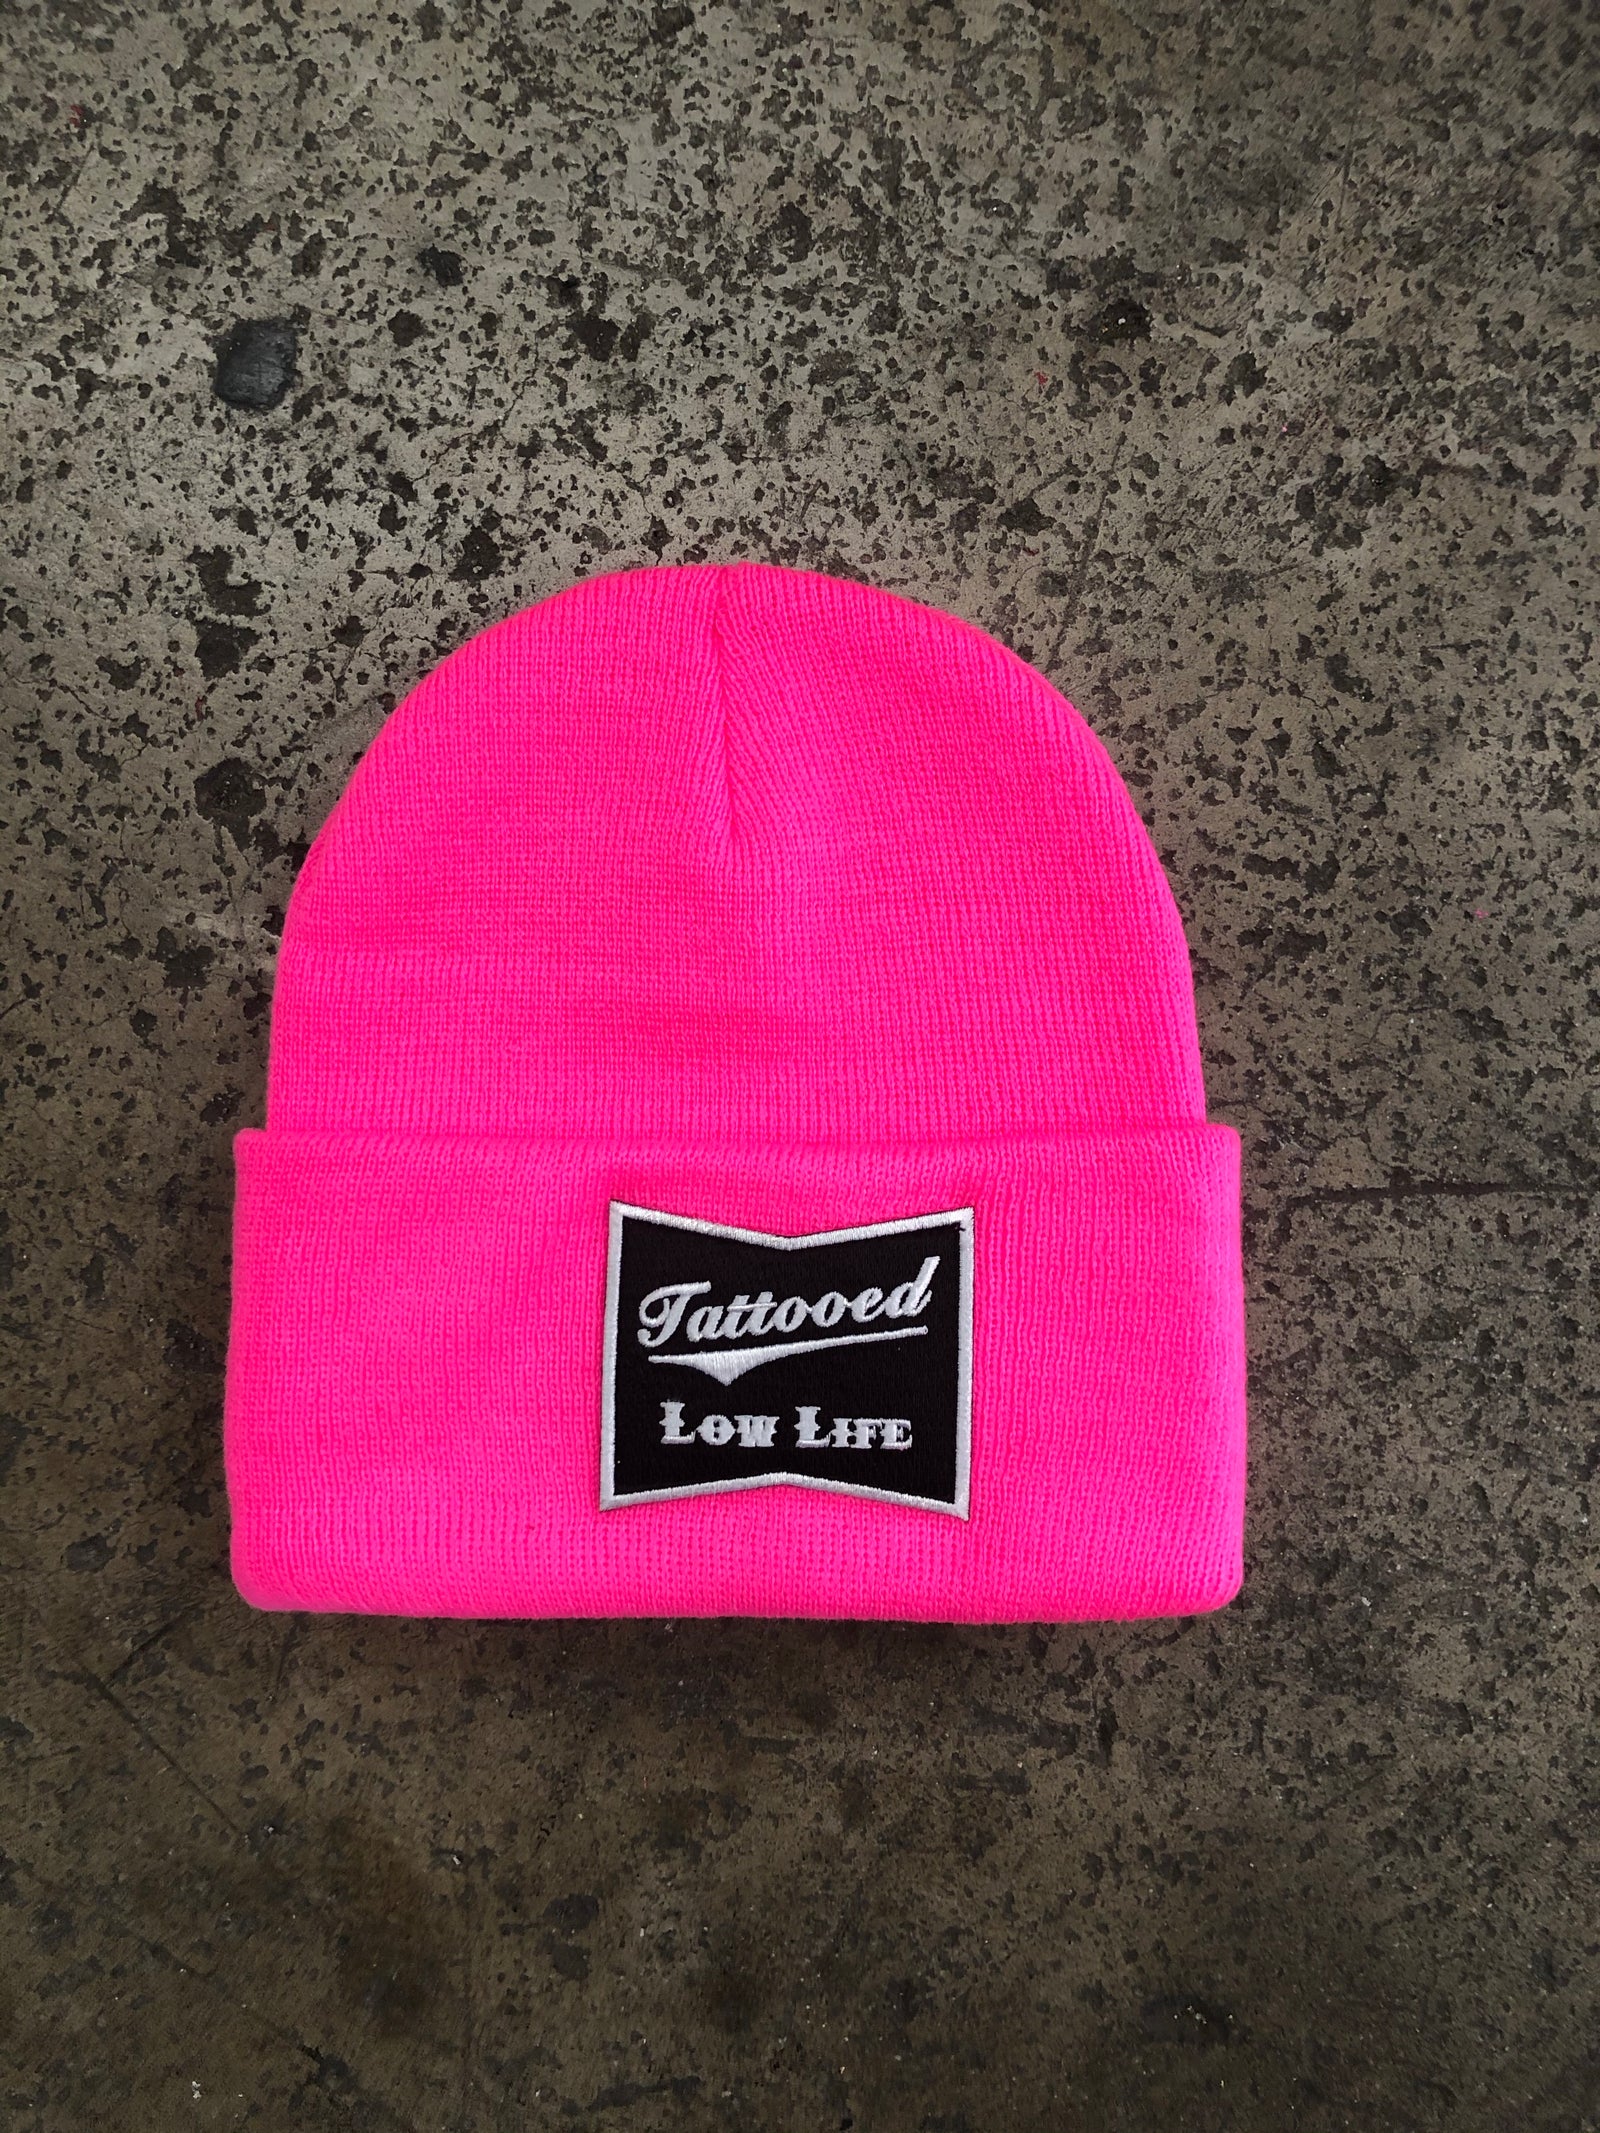 Old Town Pink Beanie